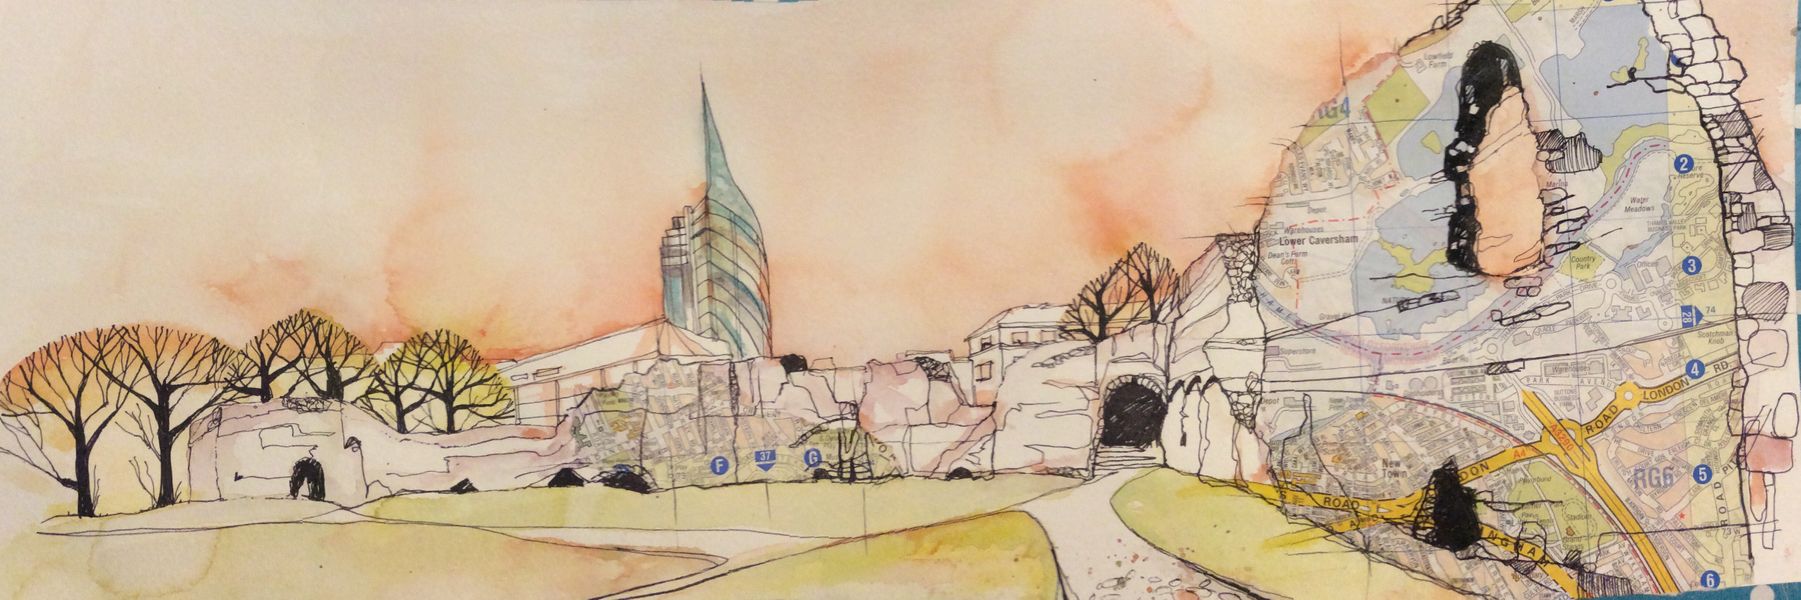 Pen, wash and collage is a different take on the urban landscape - here the Reading skyline